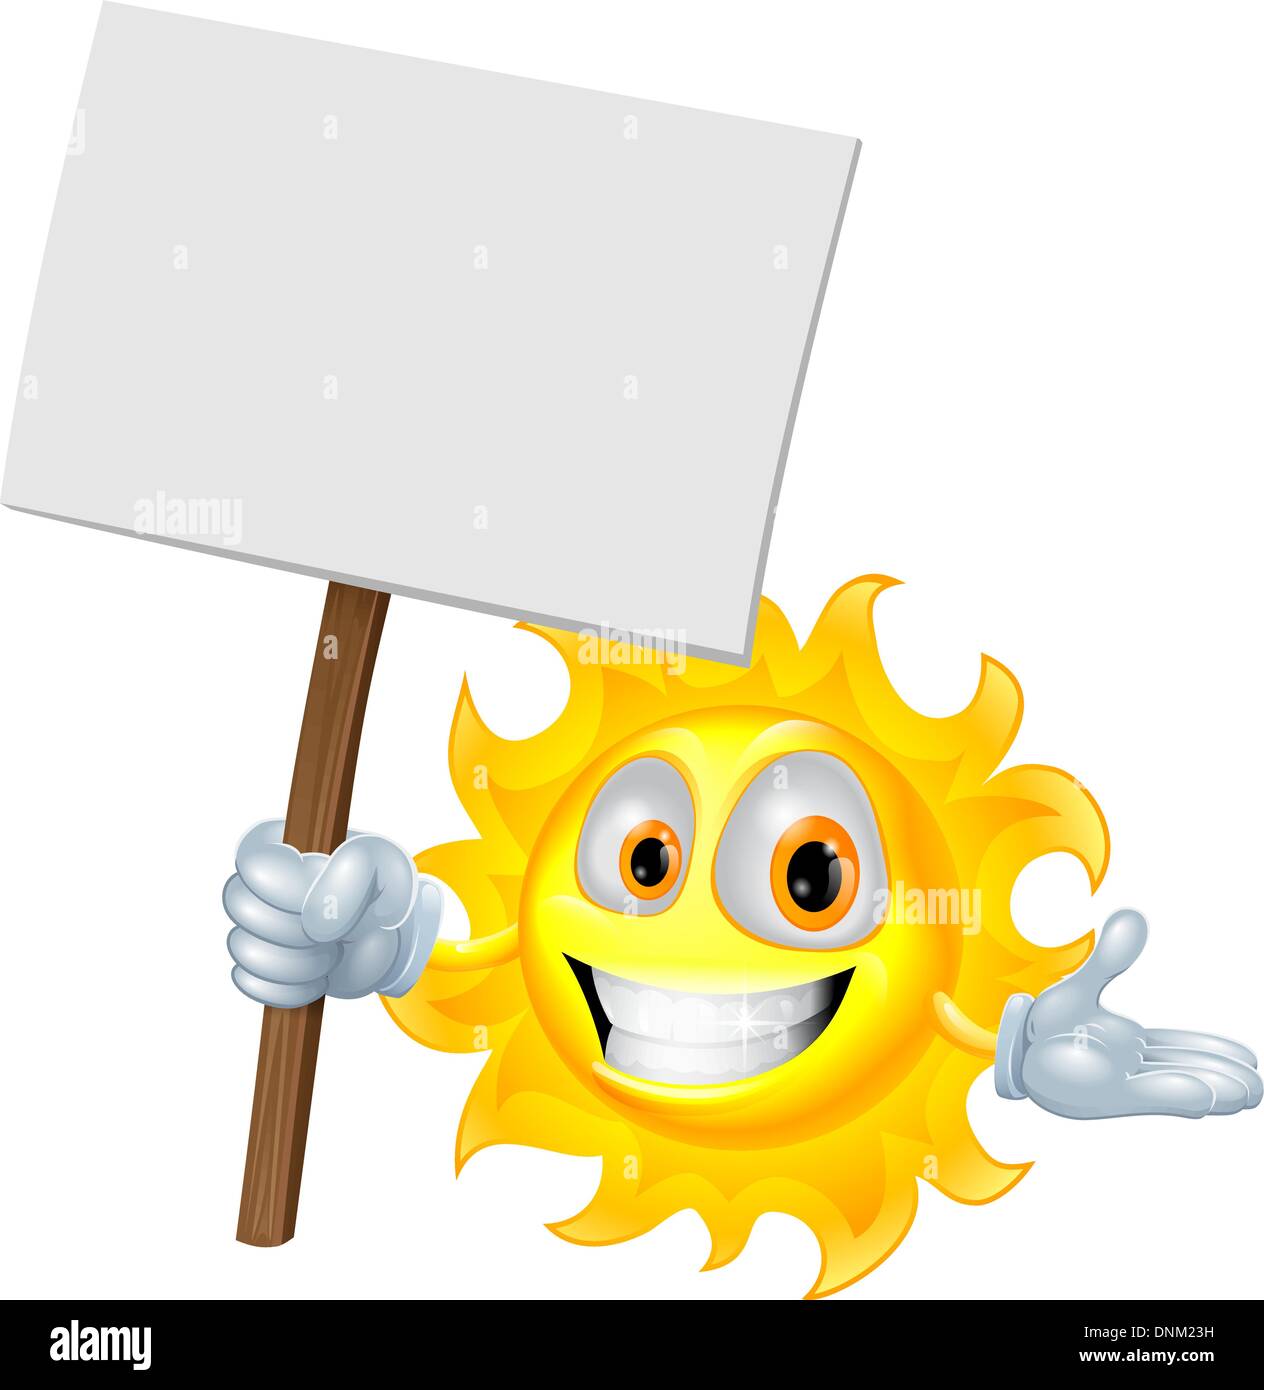 Illustration of a sun character holding a sign board Stock Vector